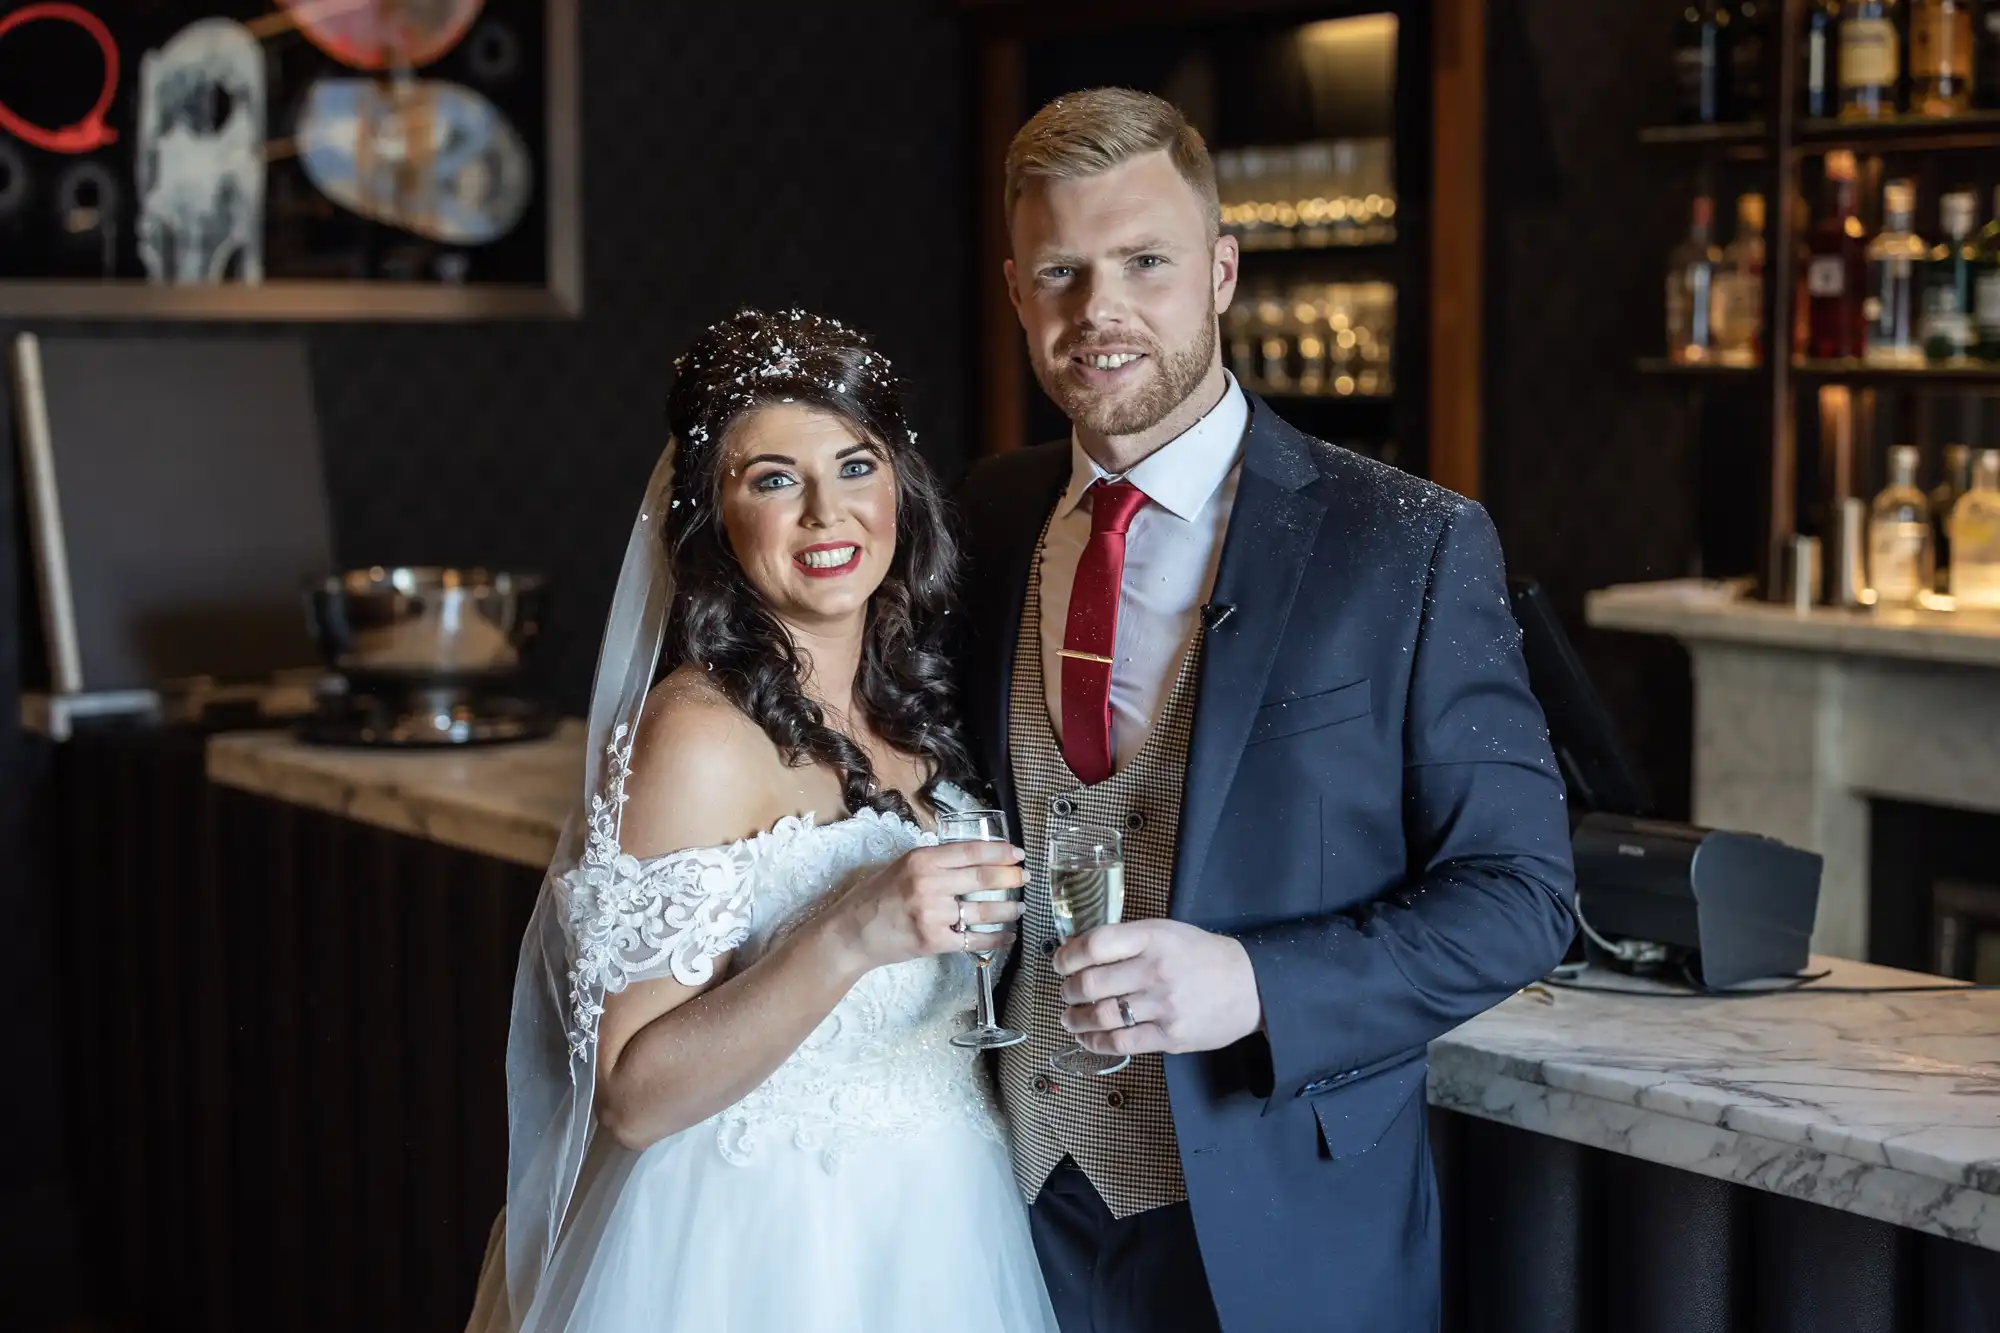 Bride in white dress and groom in a suit pose together holding glasses of champagne in a bar setting.